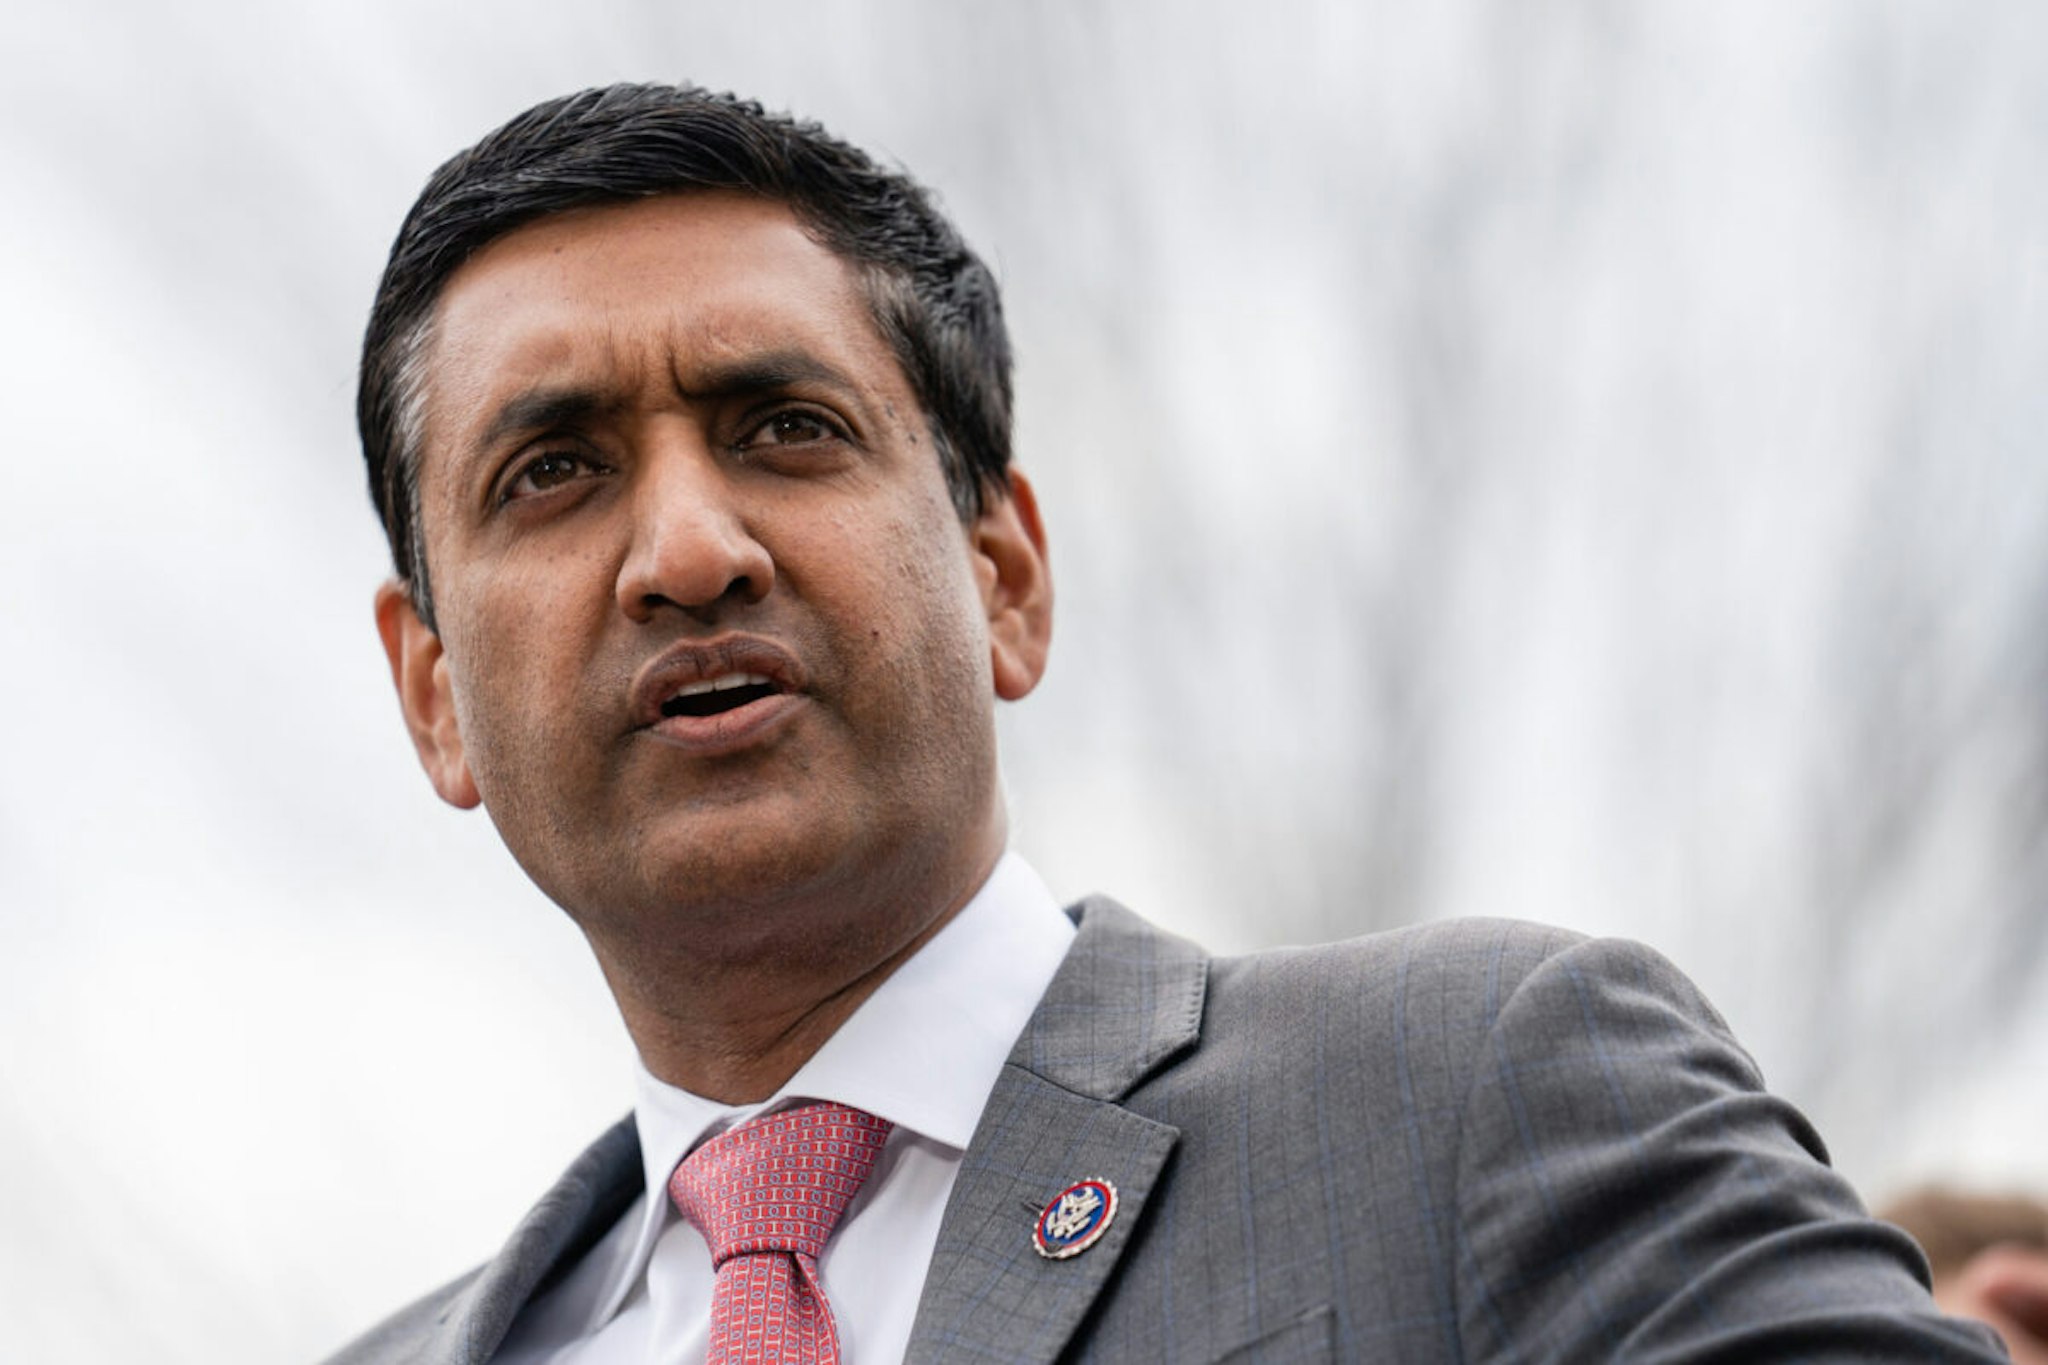 Representative Ro Khanna, a Democrat from California, speaks during a news conference for the Big Oil Windfall Profits Tax Act near the U.S. Capitol in Washington, D.C., U.S., on Wednesday, March 30, 2022.